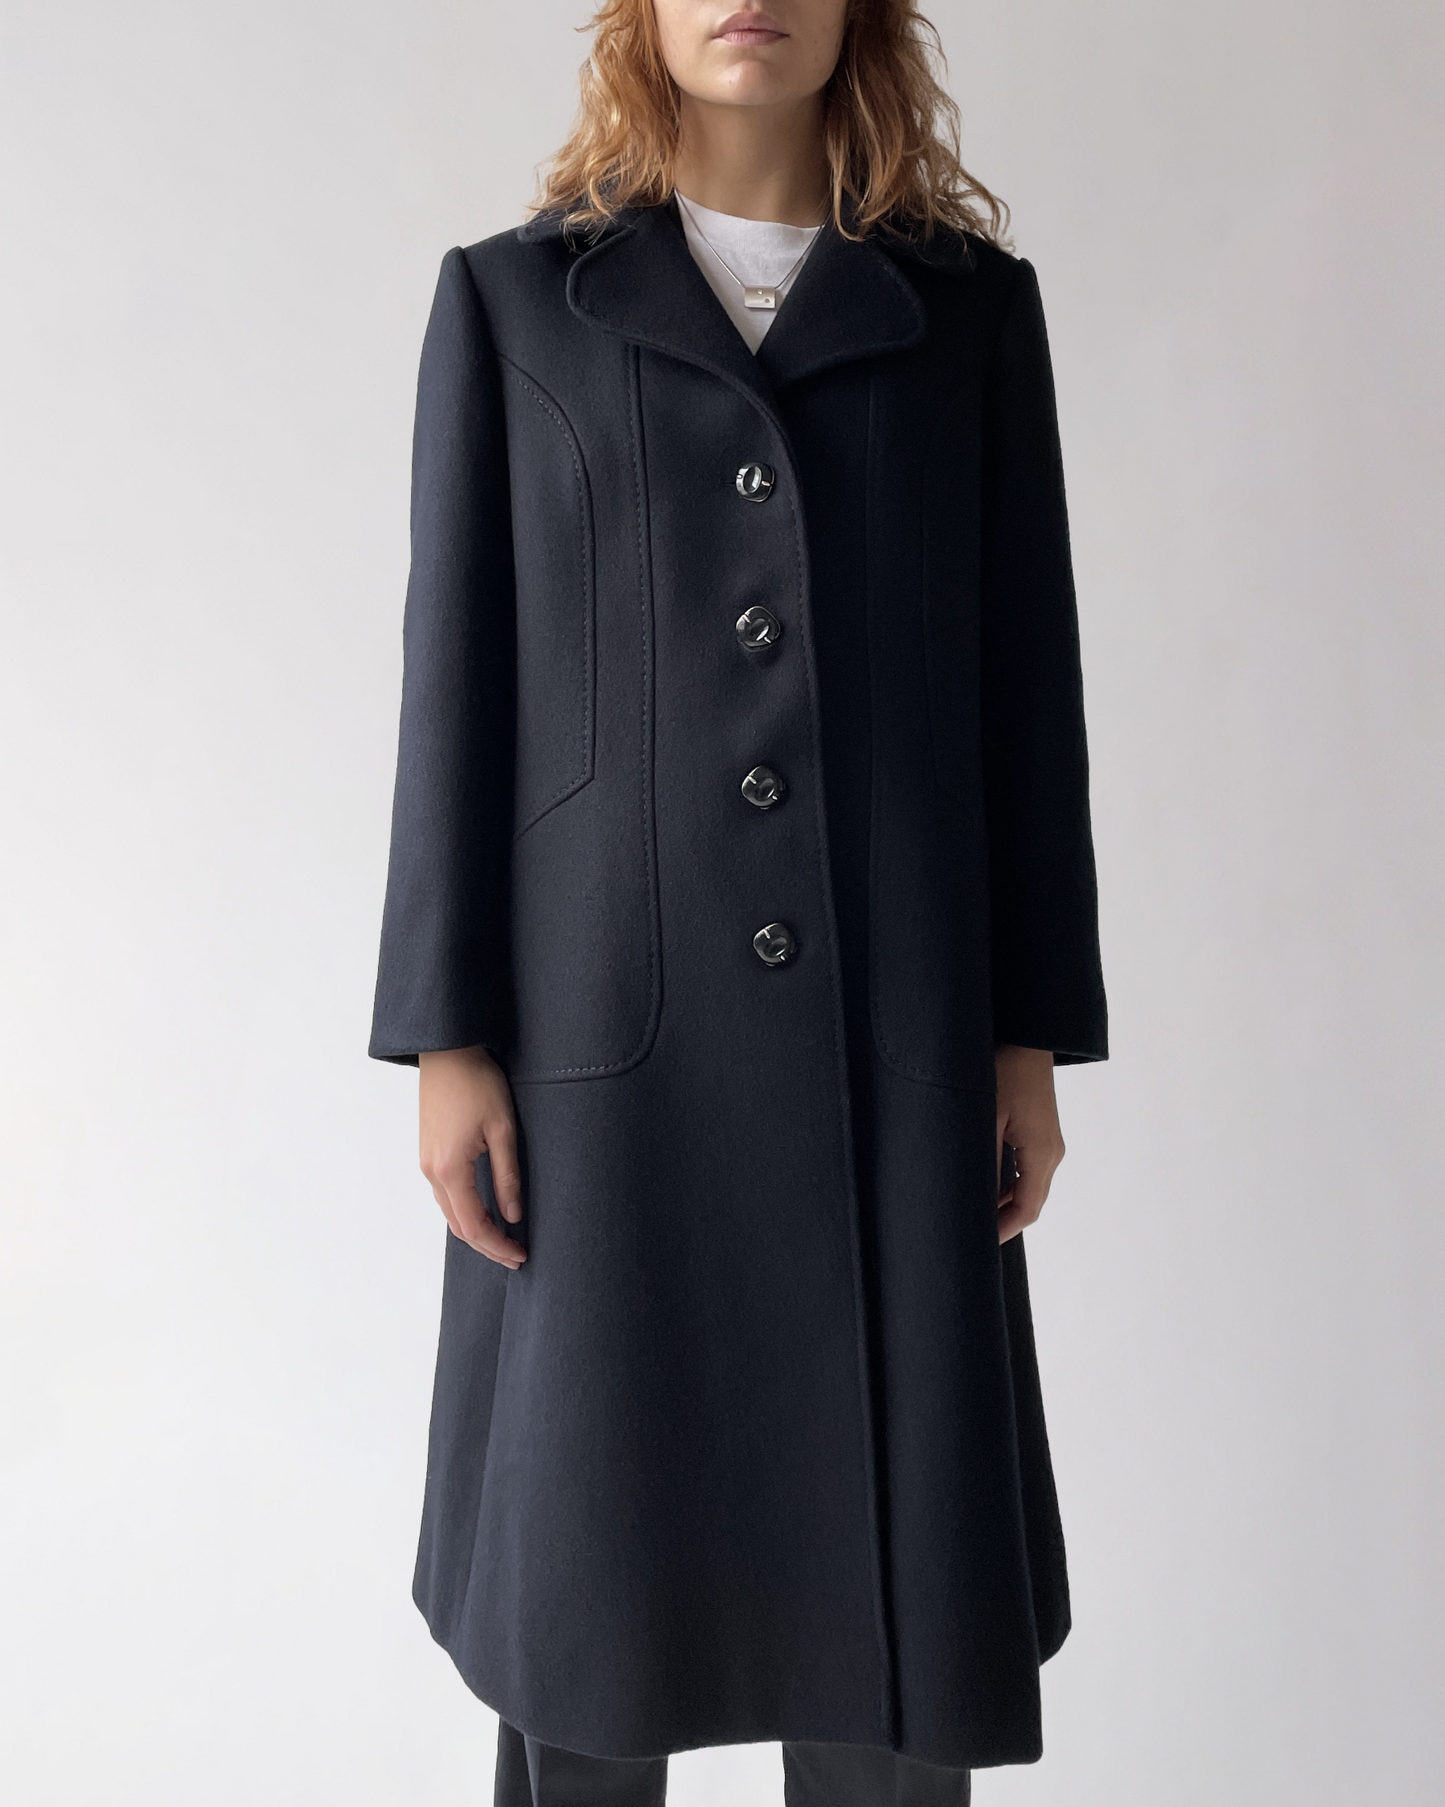 NOS Wool Coat Made In France